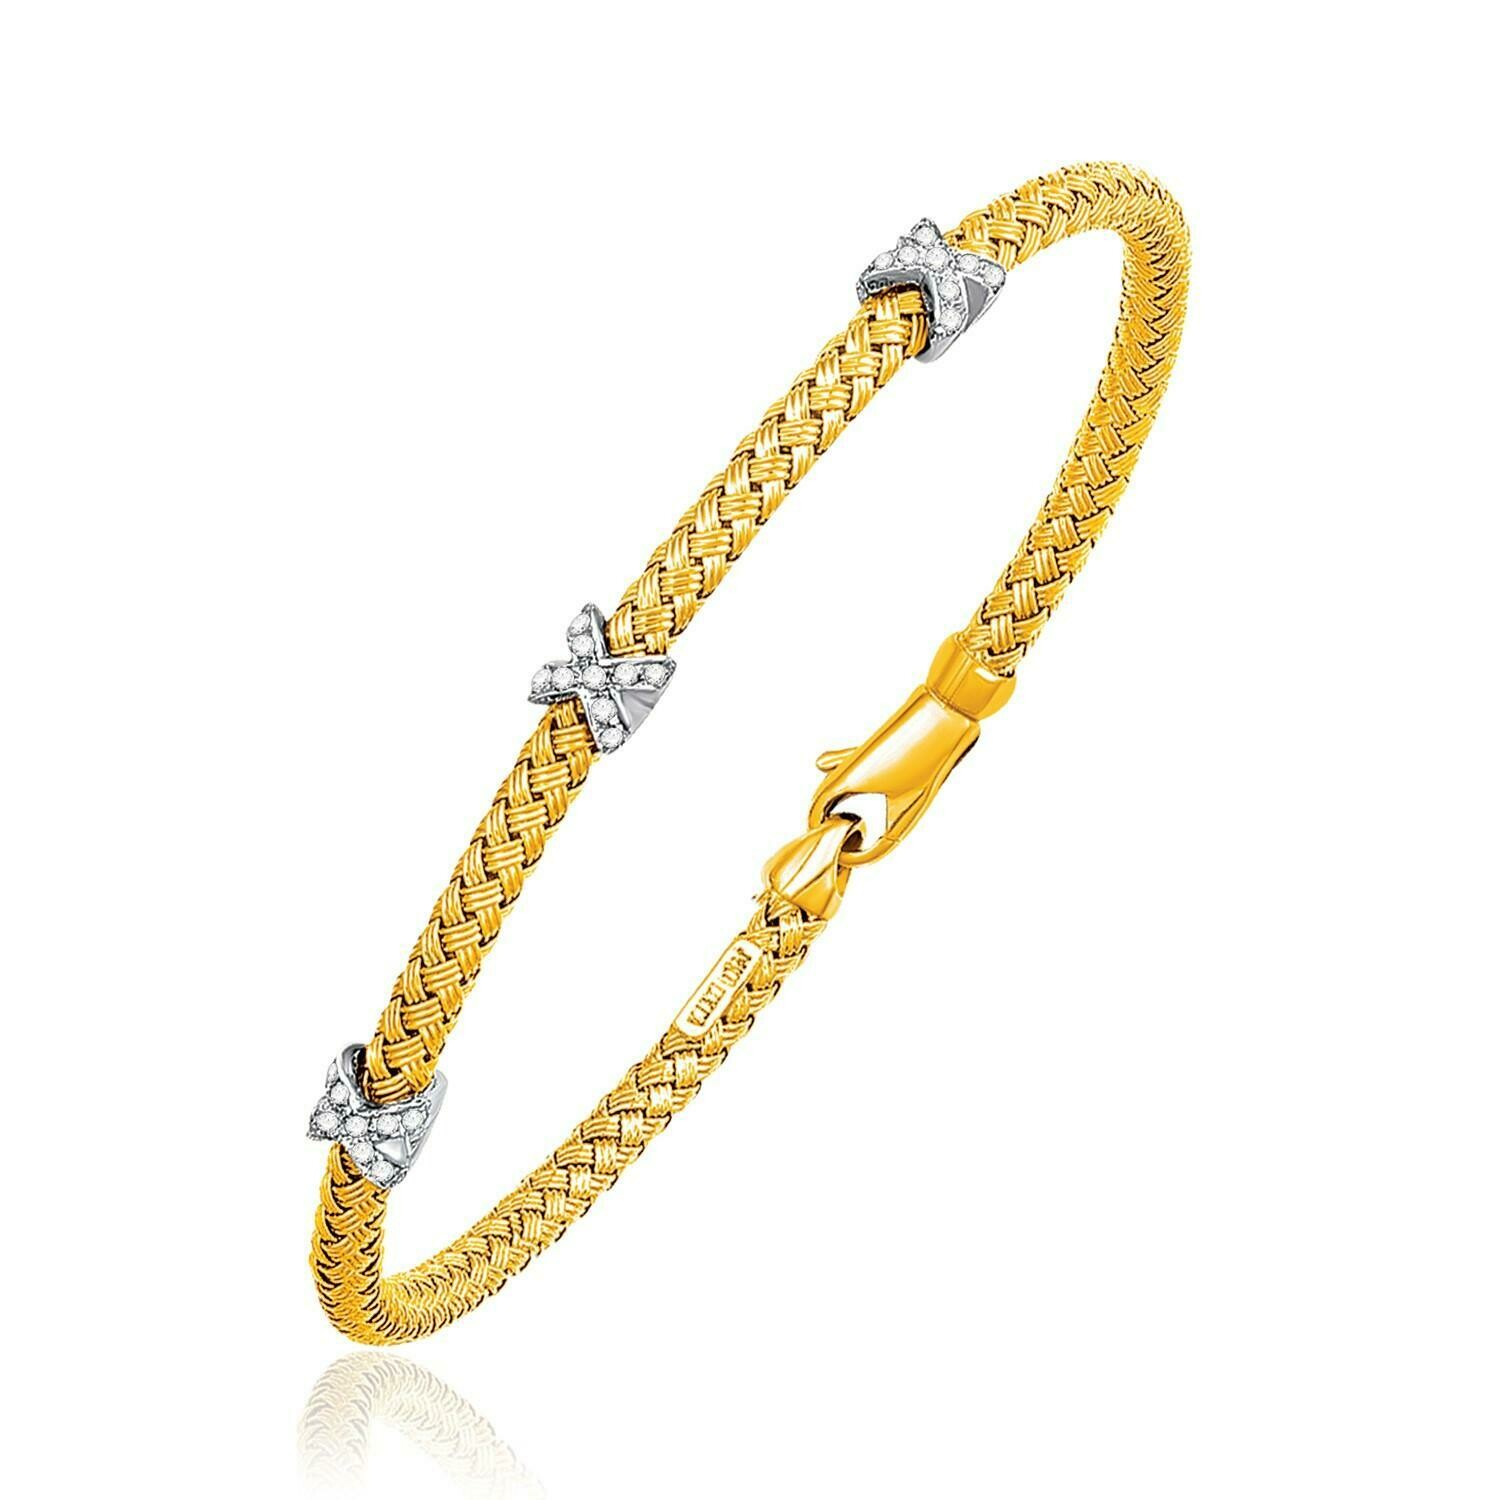 Basket Weave Bangle with Cross Diamond Accents in 14k Yellow Gold (4.0mm), Size: 7.25&quot;